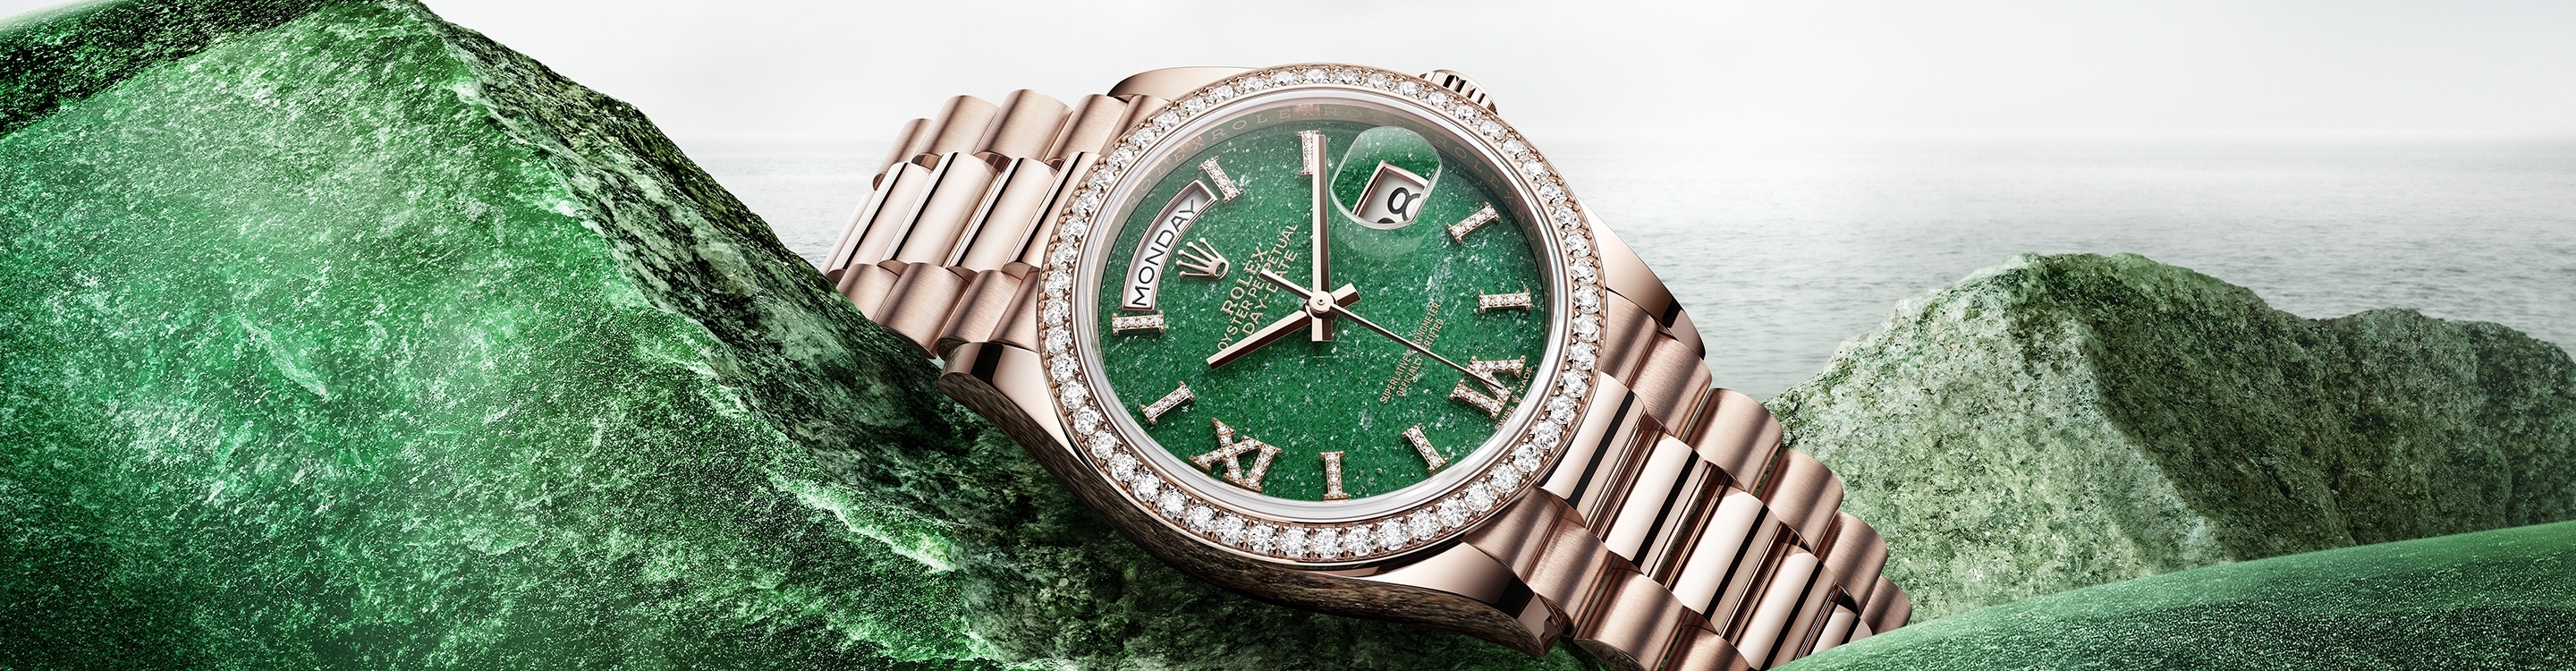 Rolex Day-Date in Gold, M128239-0023 | Europe Watch Company